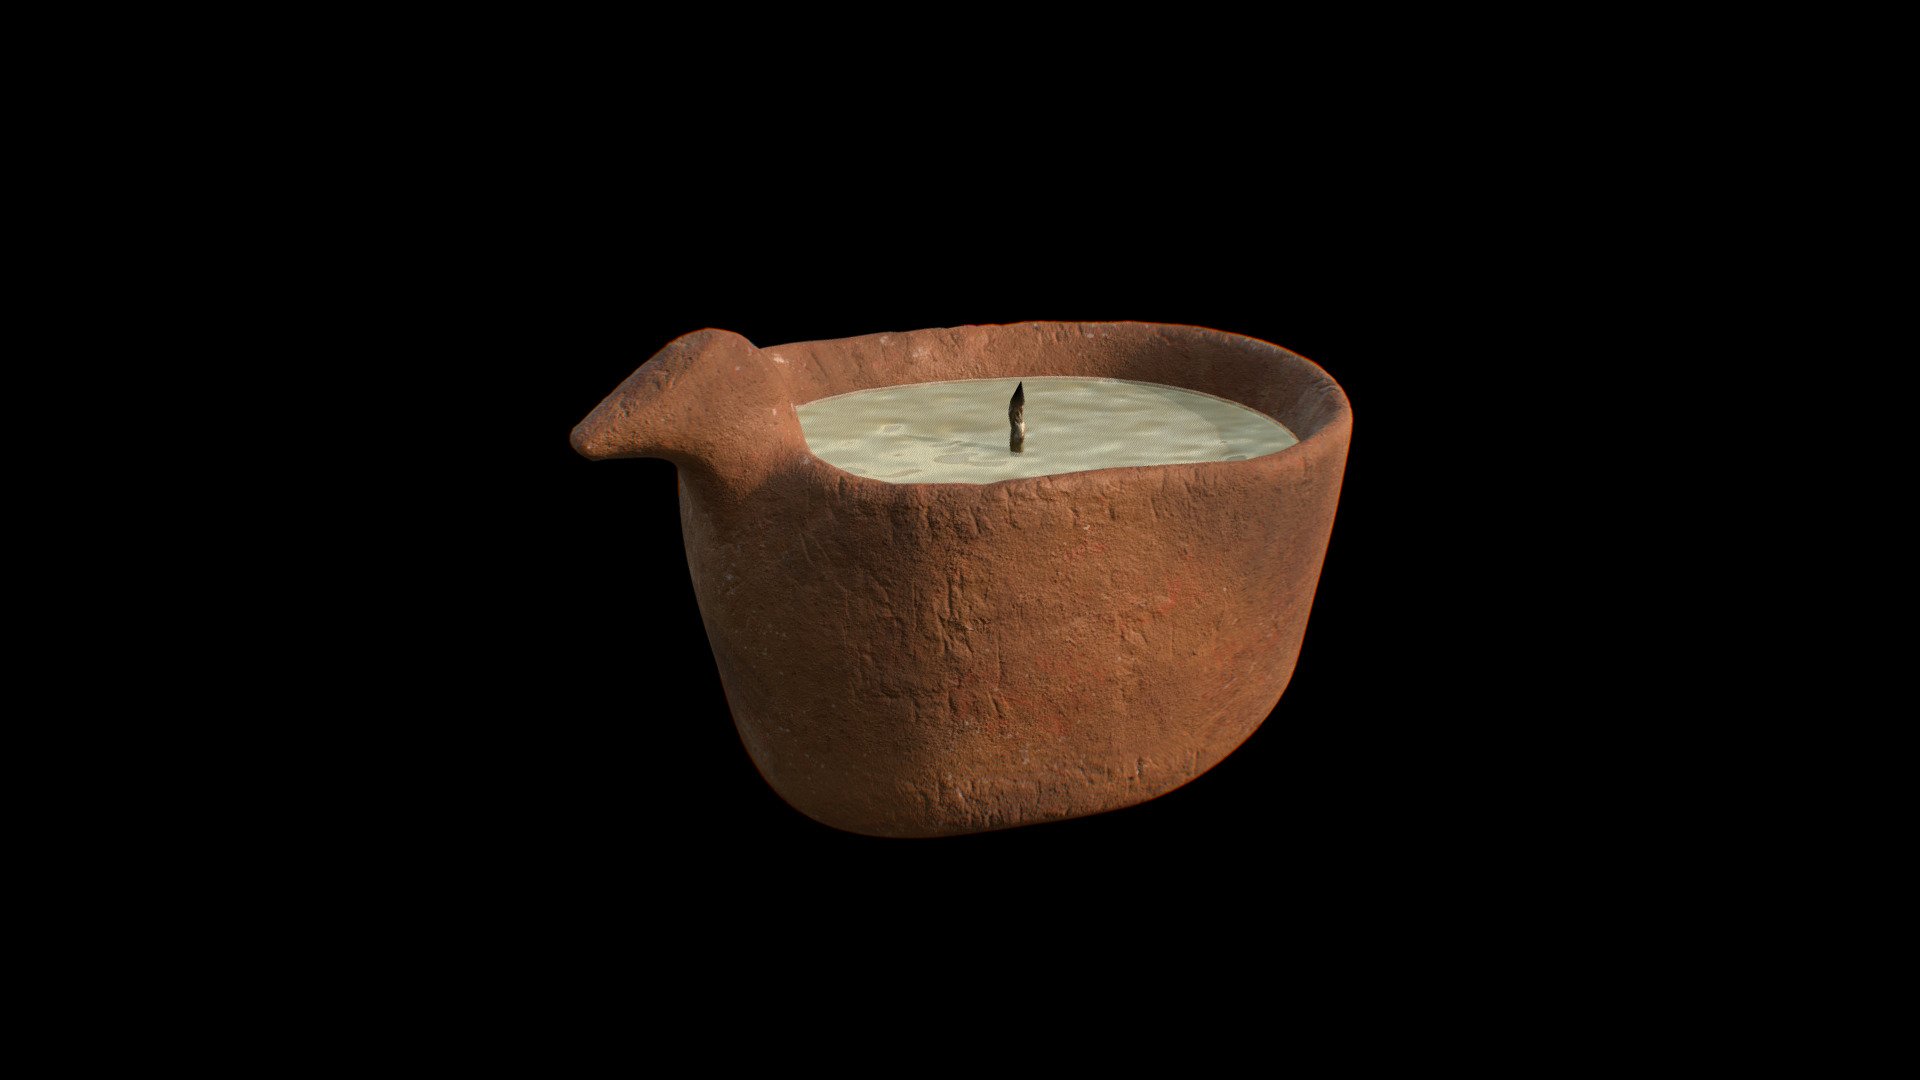 Author: Mikhail Antonov  

Scientific adviser: Tatiana Loshakova 

3D Reconstruction of ceramic oil lamp (Toksanbay settlement) XVIII-XVII BC (bronze age).

Sources: archival materials and scientific article:  Samashev Z.S., Ermolaeva A.S., Loshakovа T.N.. 2007. In:. Bone cheek-pieces from the settlement of Toksanbay. On the question of the complex of charioteers of the population of Ustyurt in the Bronze Age.(Voprosy istorii i arheologii zapadnogo Kazahstana) Oral. vol 1, 2007, 87-102. (in russian) - Reconstruction of ceramic oil lamp (Bronze Age) - 3D model by Margulan Institute of Archaeology (@margulan) 3d model